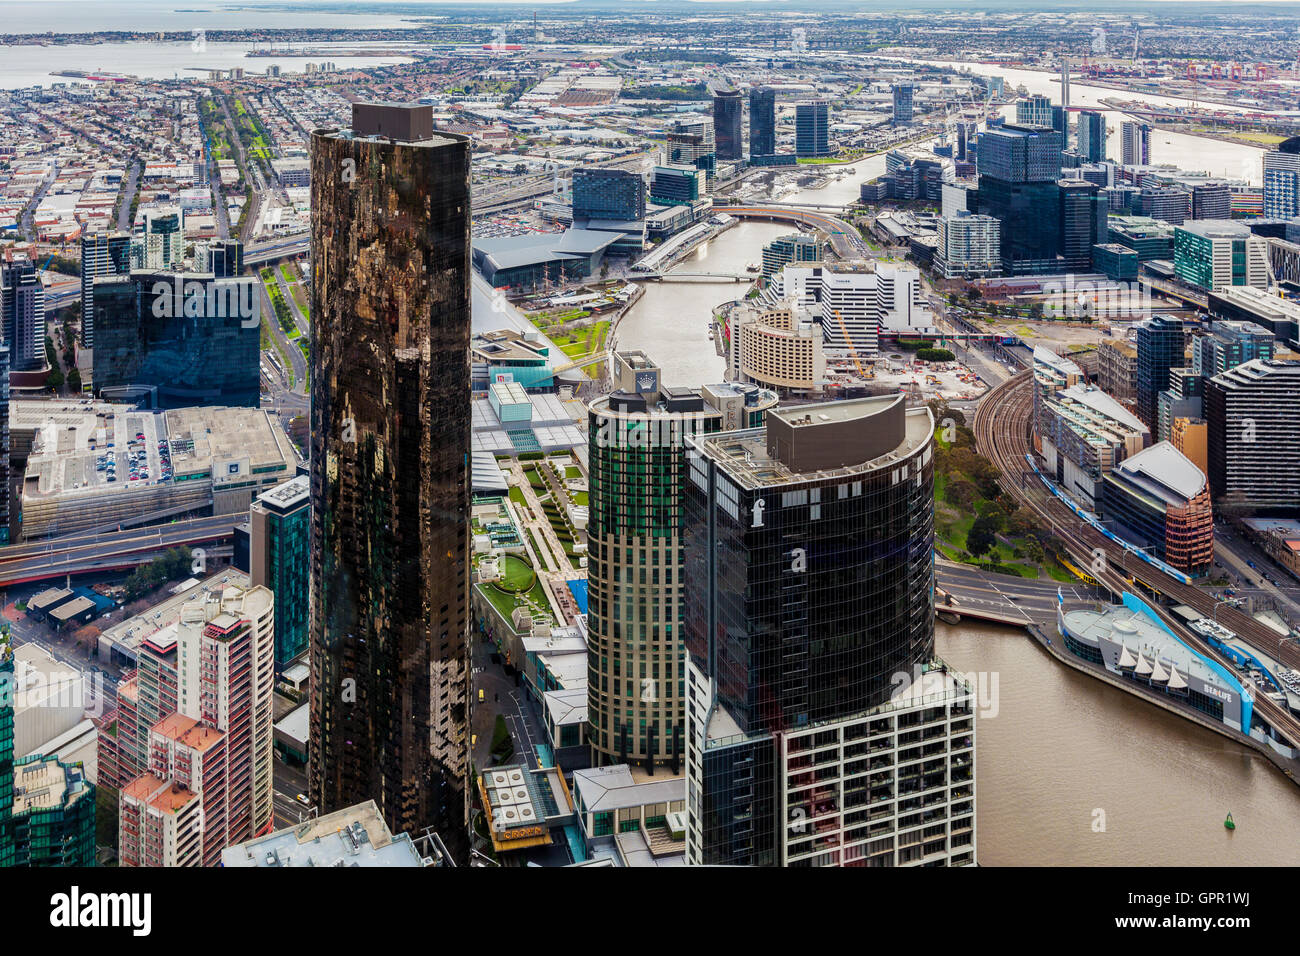 Melbourne, Australia - August 27, 2016:  Aerial view of Melbourne CBD with skyscrapers and yarra river winding through. Stock Photo